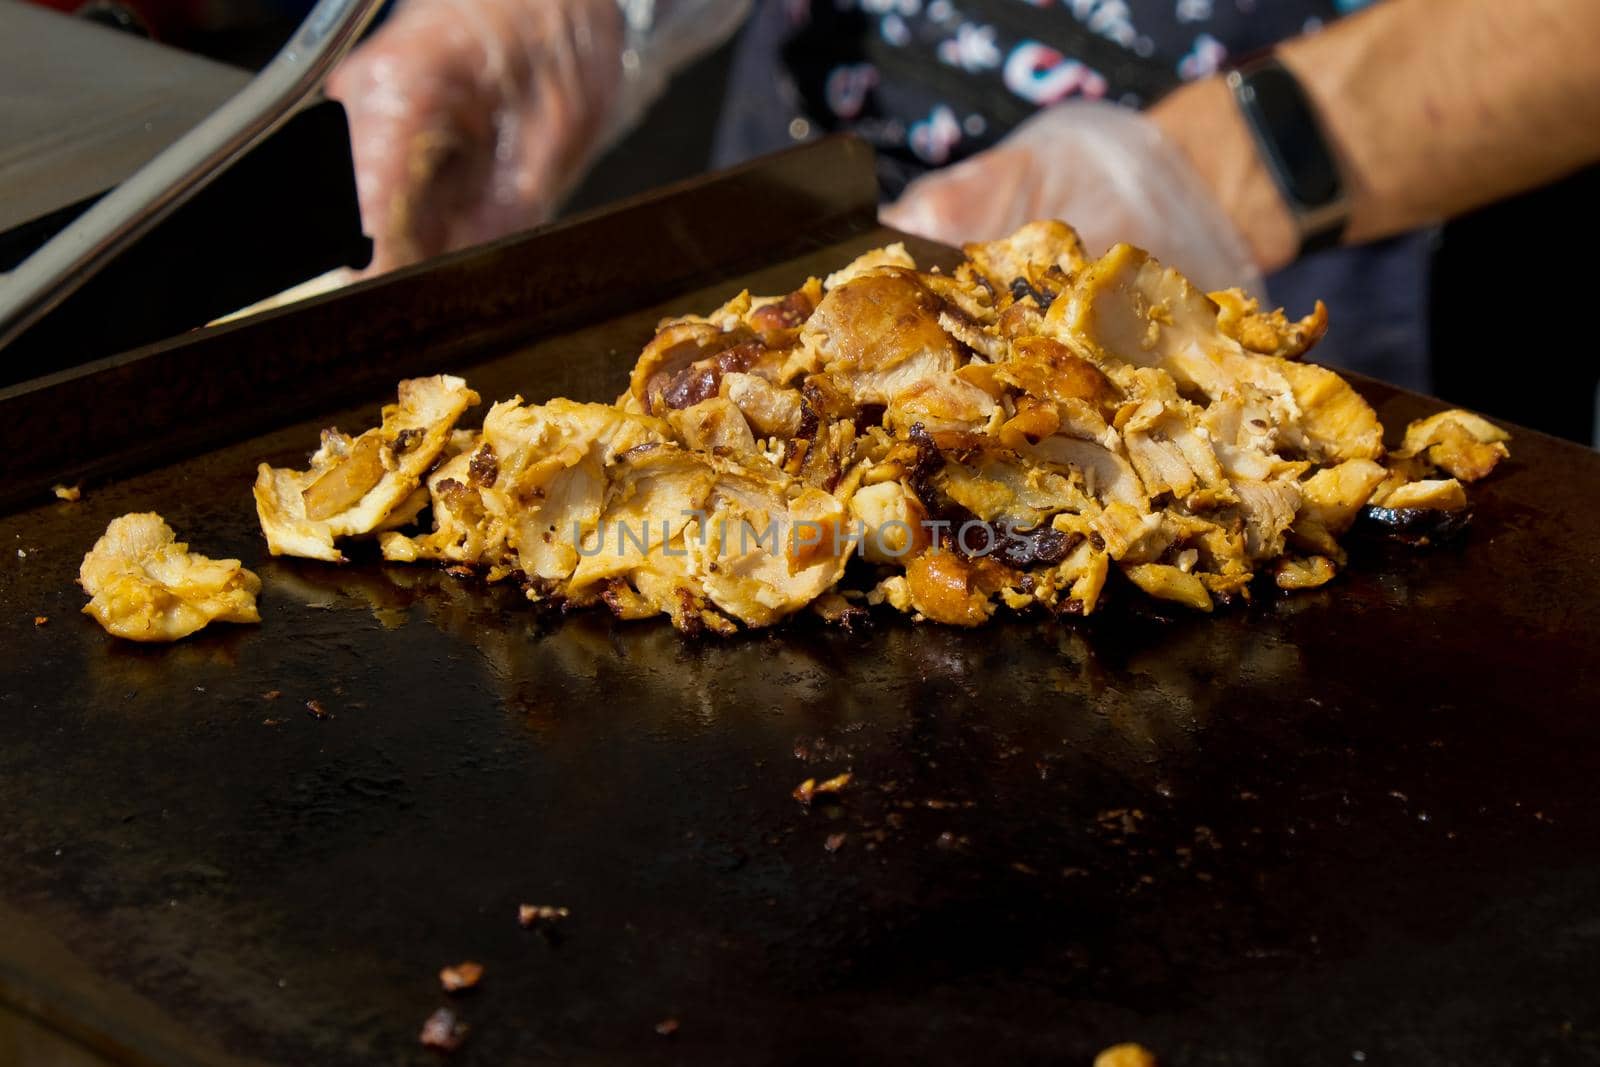 Chunks of fried chicken for making shawarma. Street food festival. Selective focus.